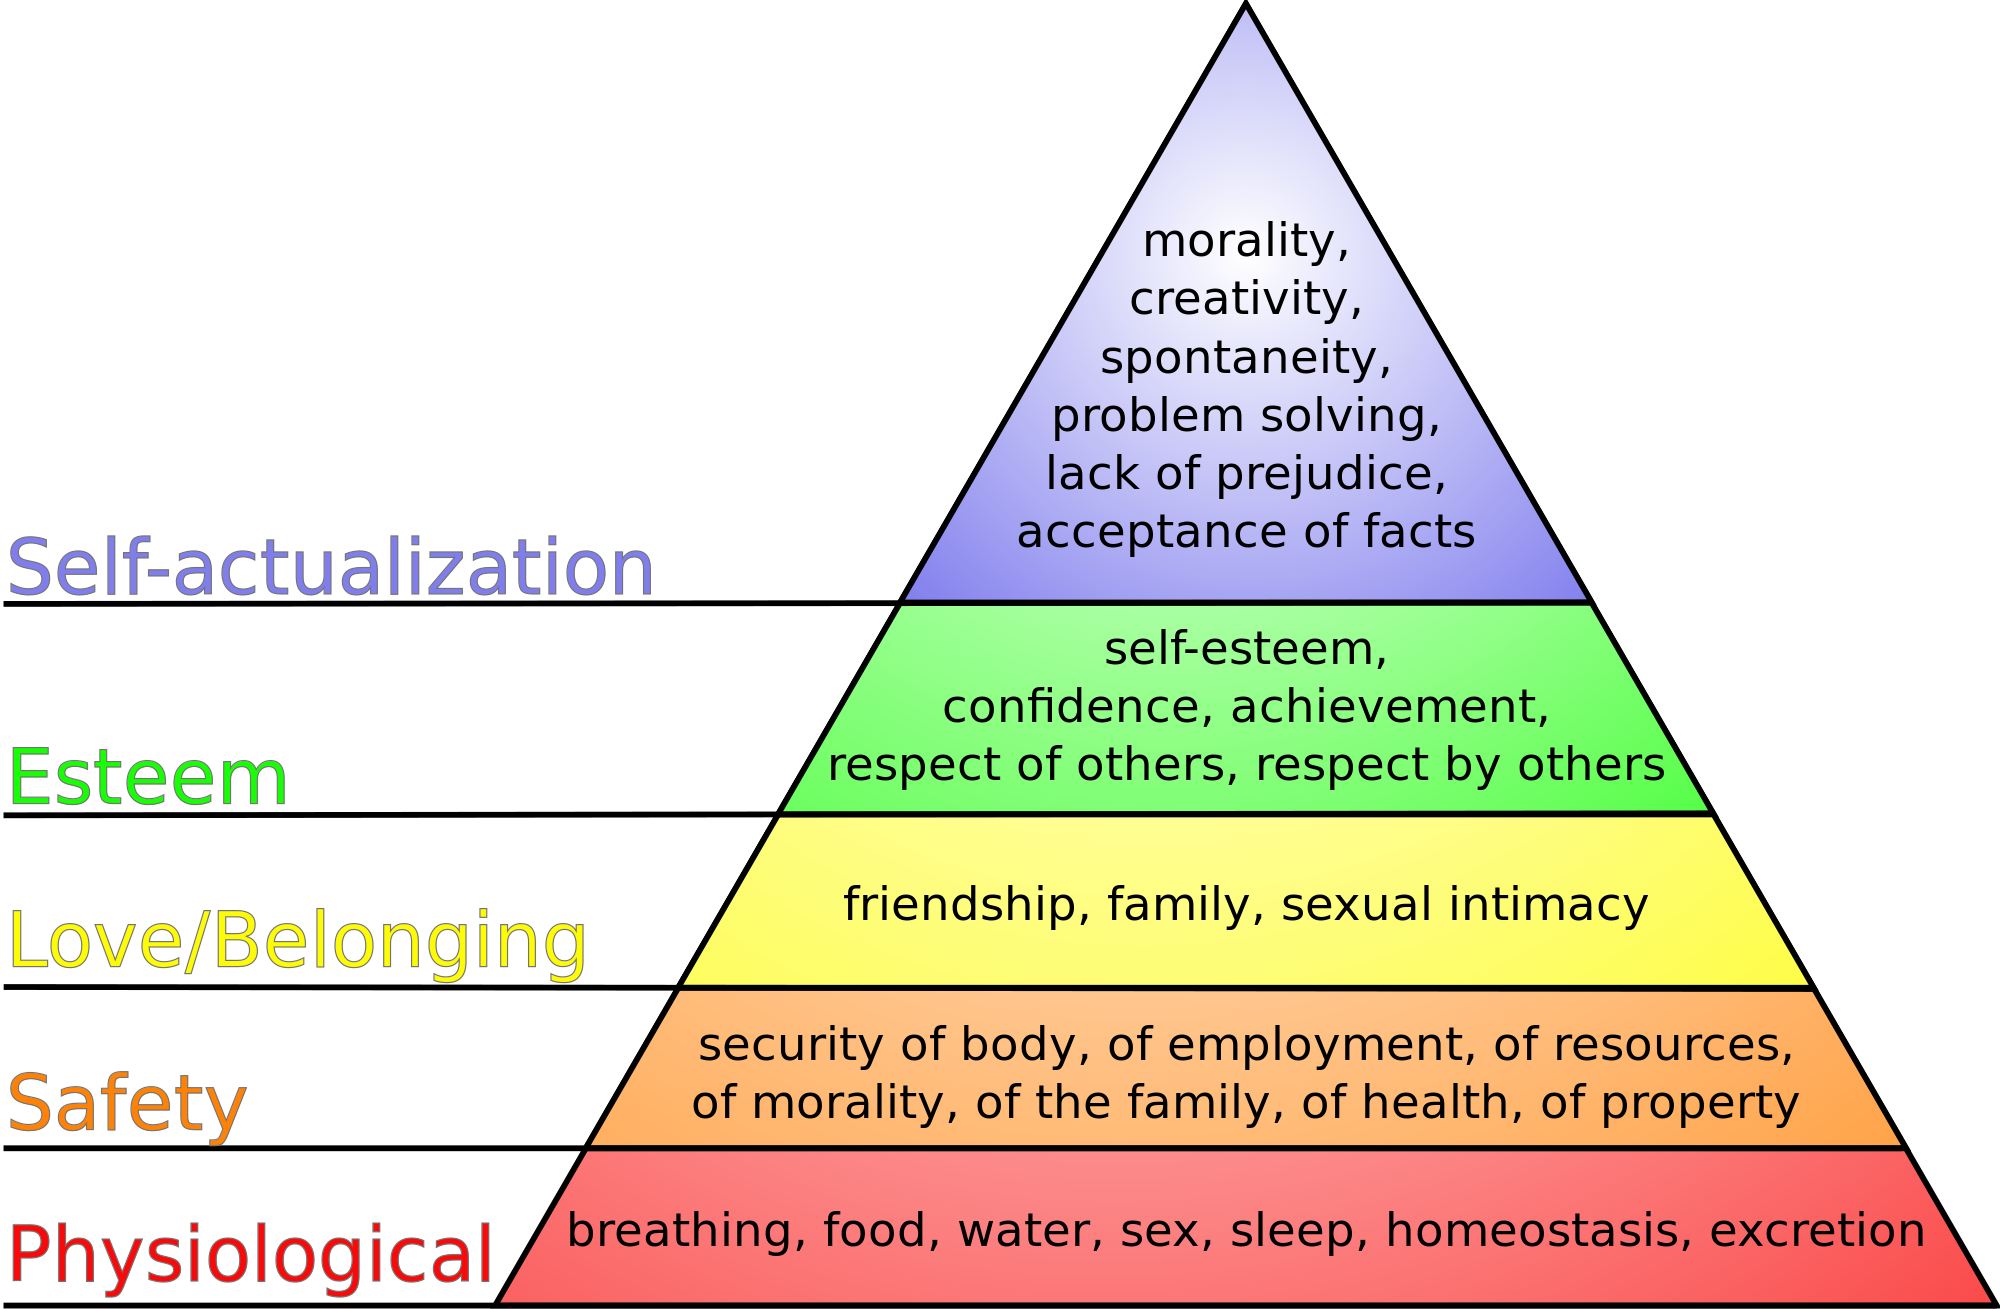 Maslow's hiersrchy of needs